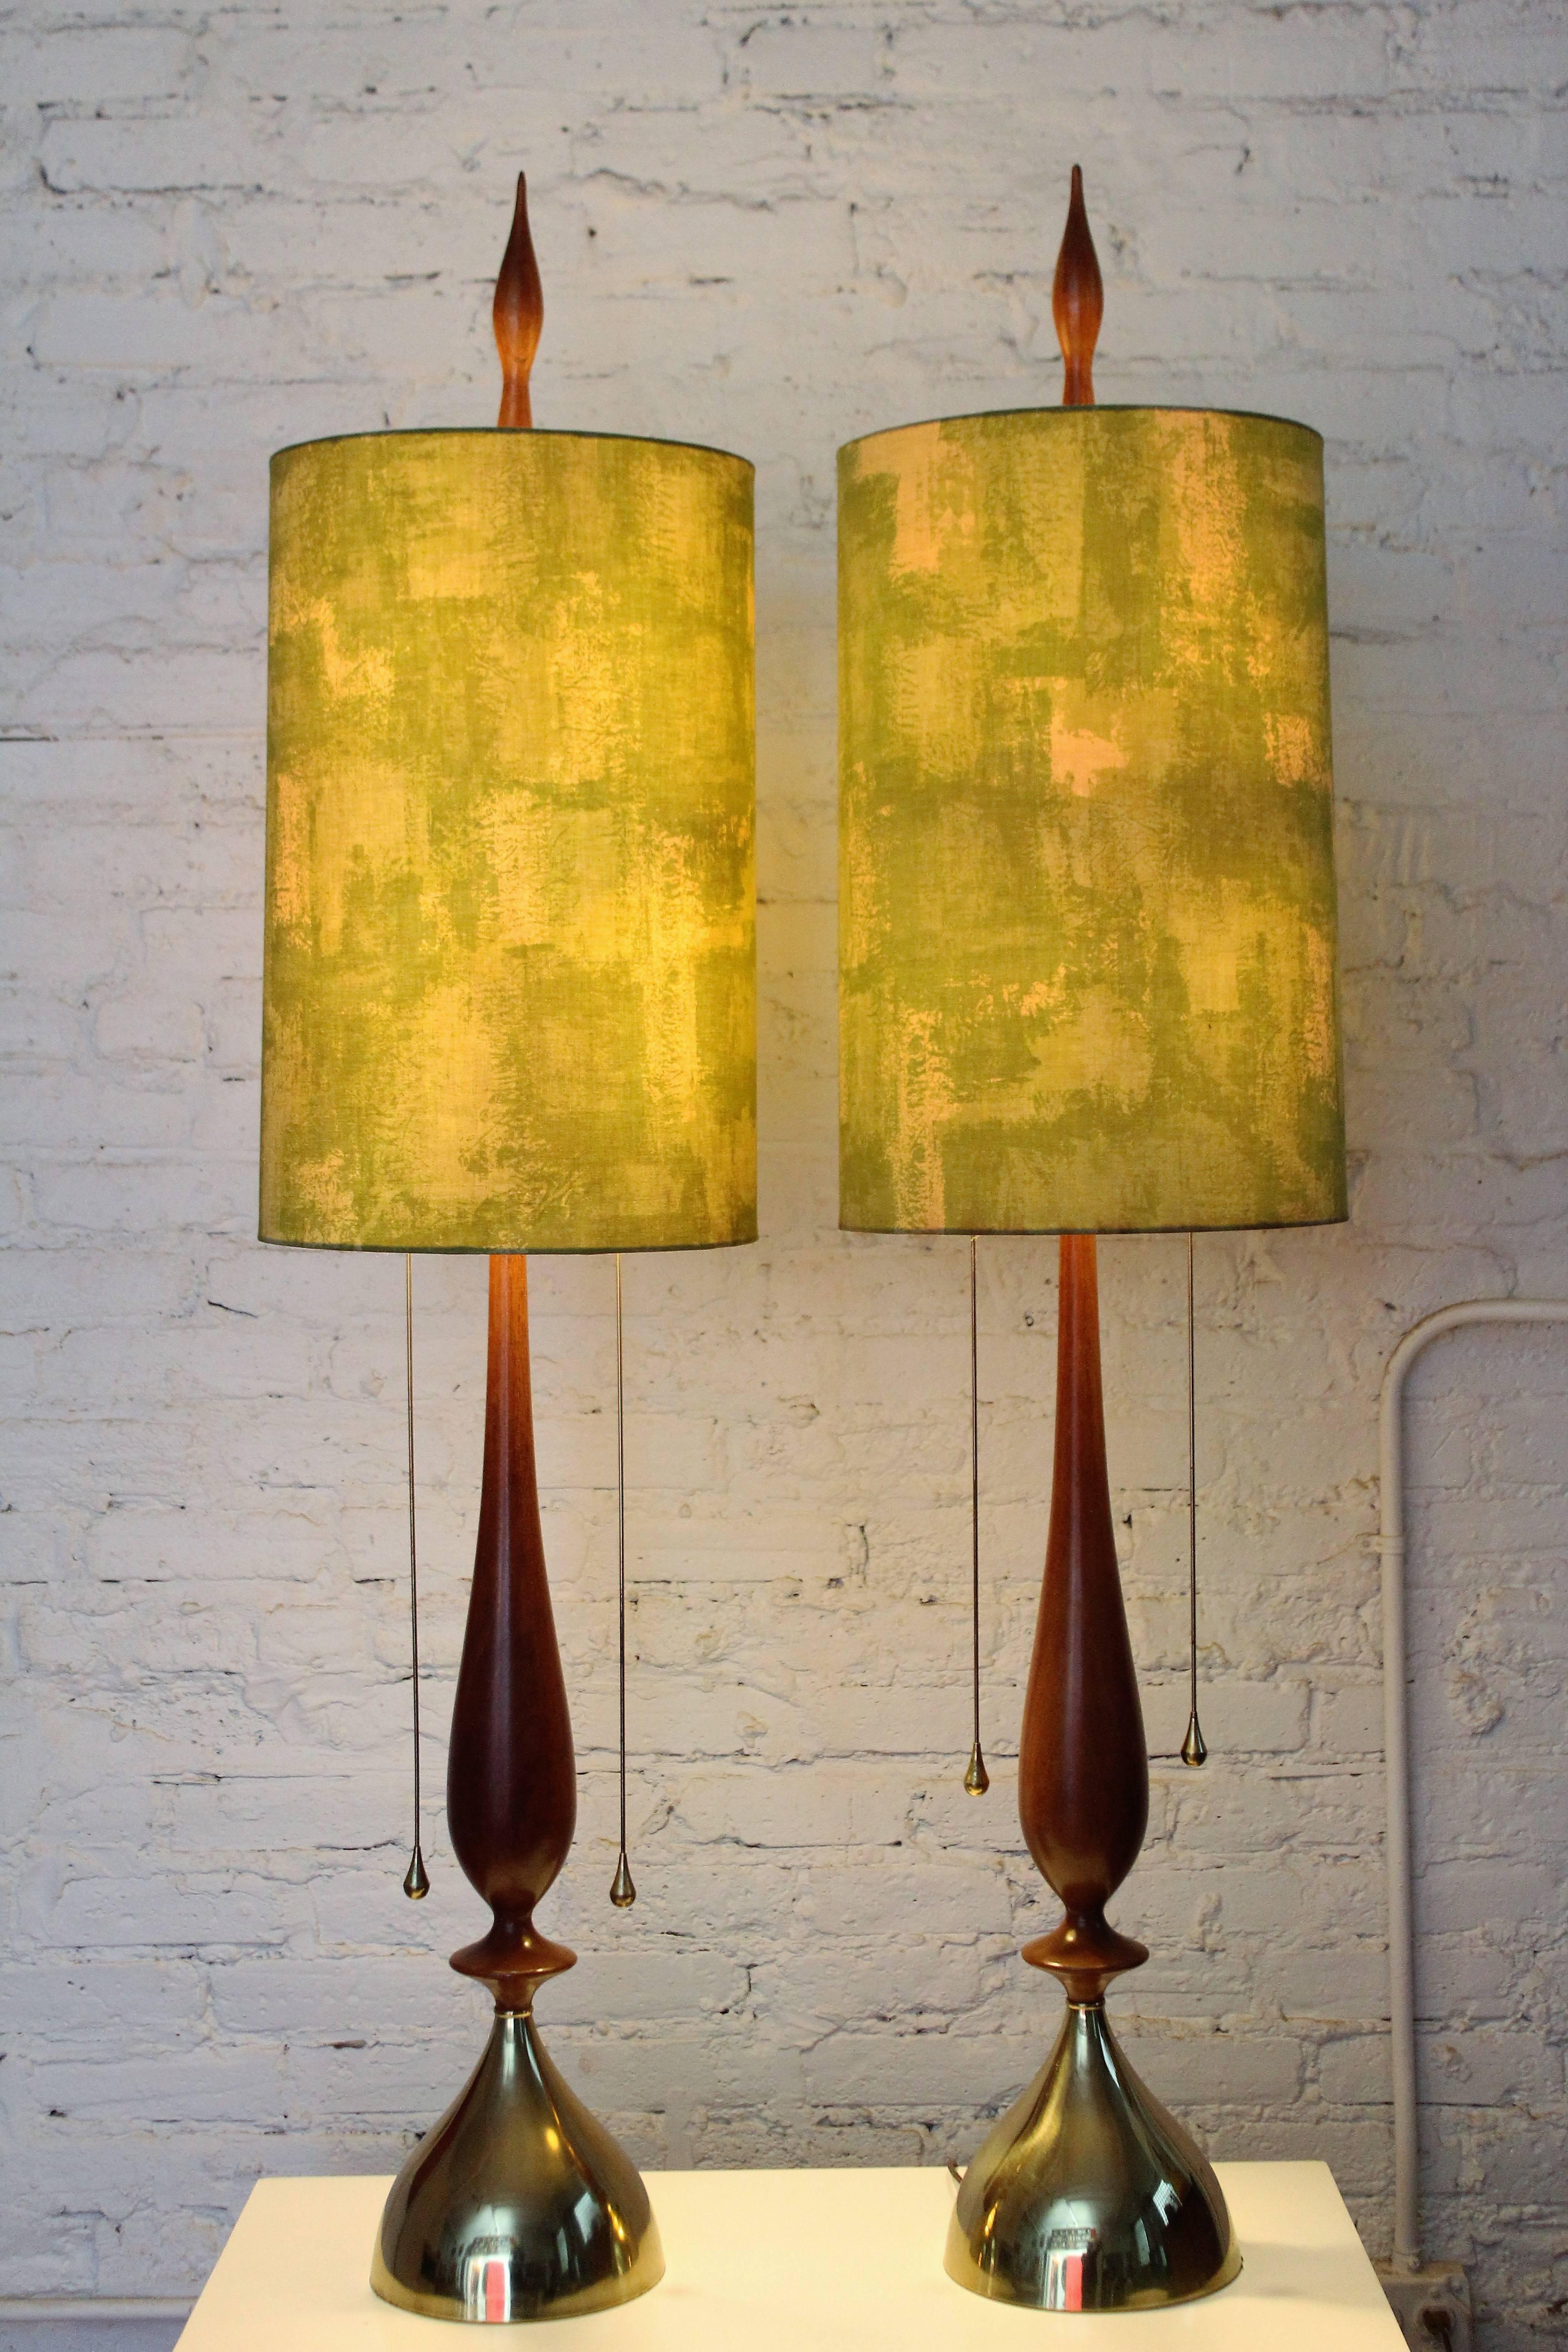 Pair of Frederick Cooper Mid-Century Modern lamps, circa 1960. Statement making table lamps by the master himself. This pair of Frederick Cooper lamps boasts the original shades, finials and pulls. This price is for the pair. Dimensions: 50